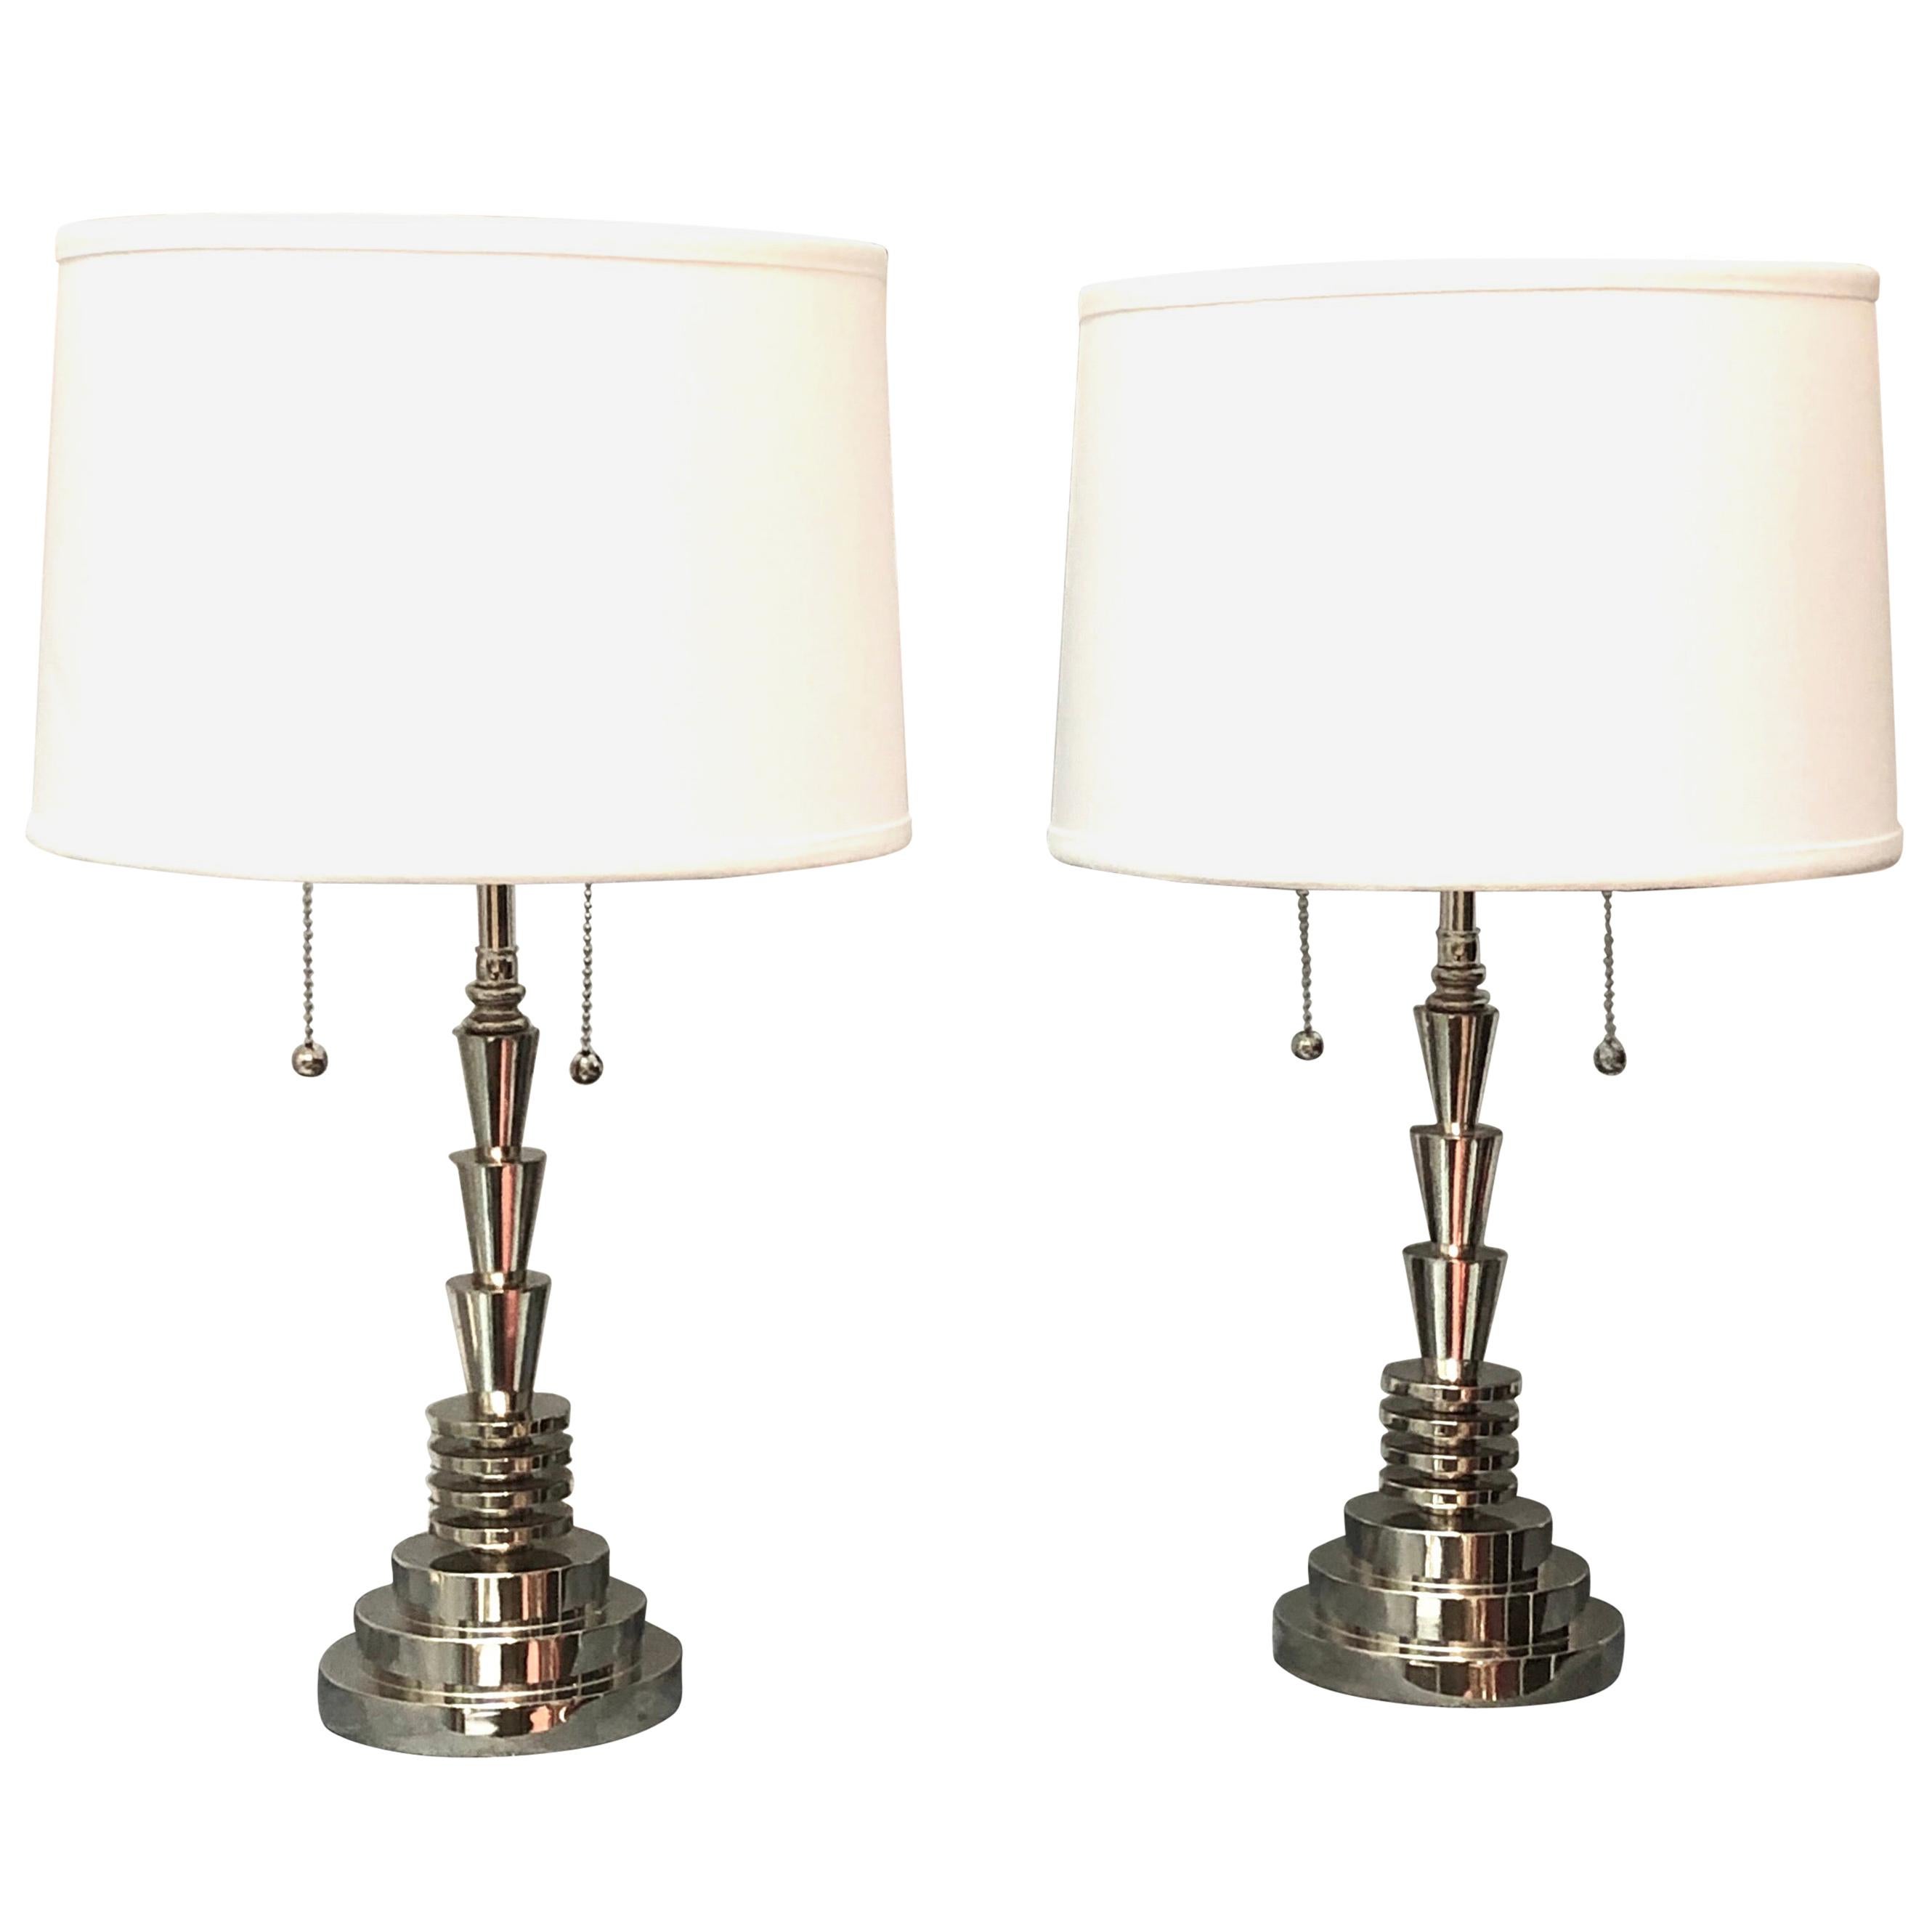 Jay Spectre Pair of Polished Nickel Table Lamps by Hanson